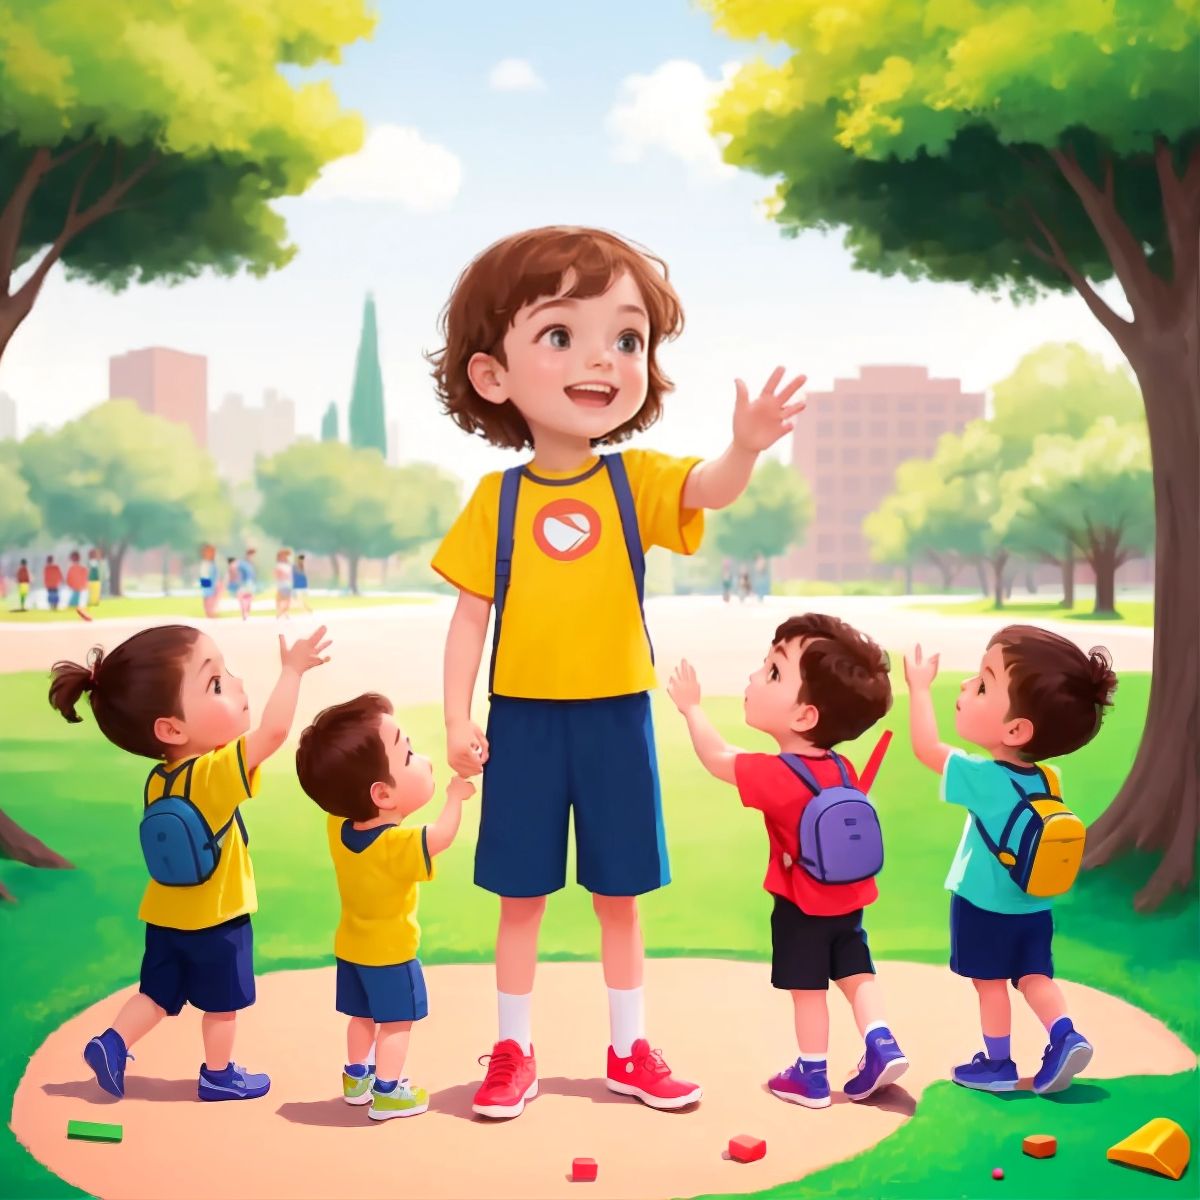 Kid surrounded by other children, eager to learn sign language at the park.